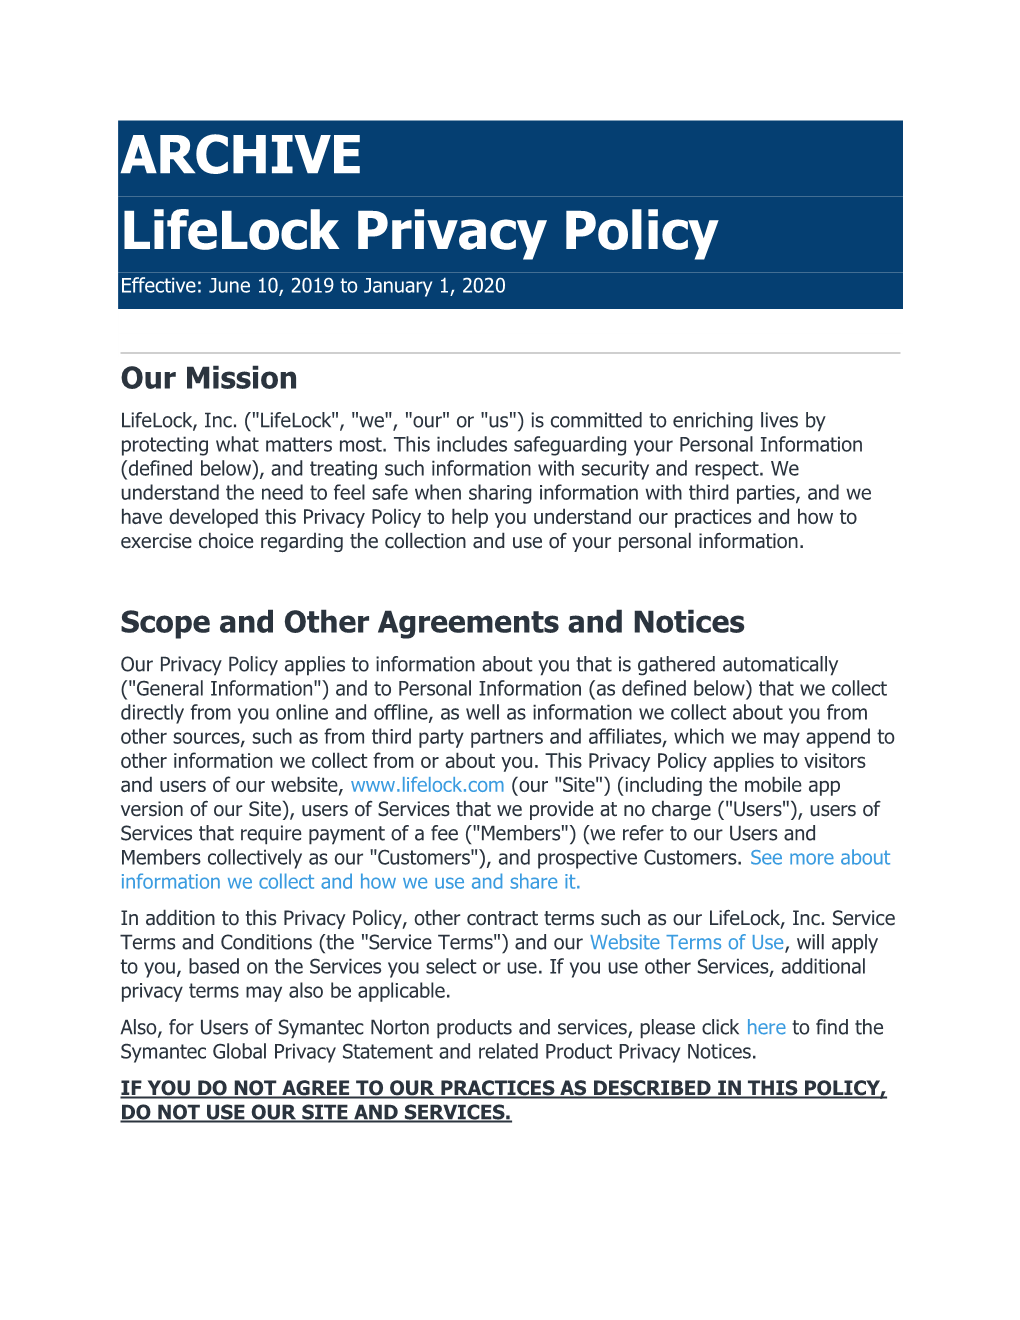 ARCHIVE Lifelock Privacy Policy Effective: June 10, 2019 to January 1, 2020